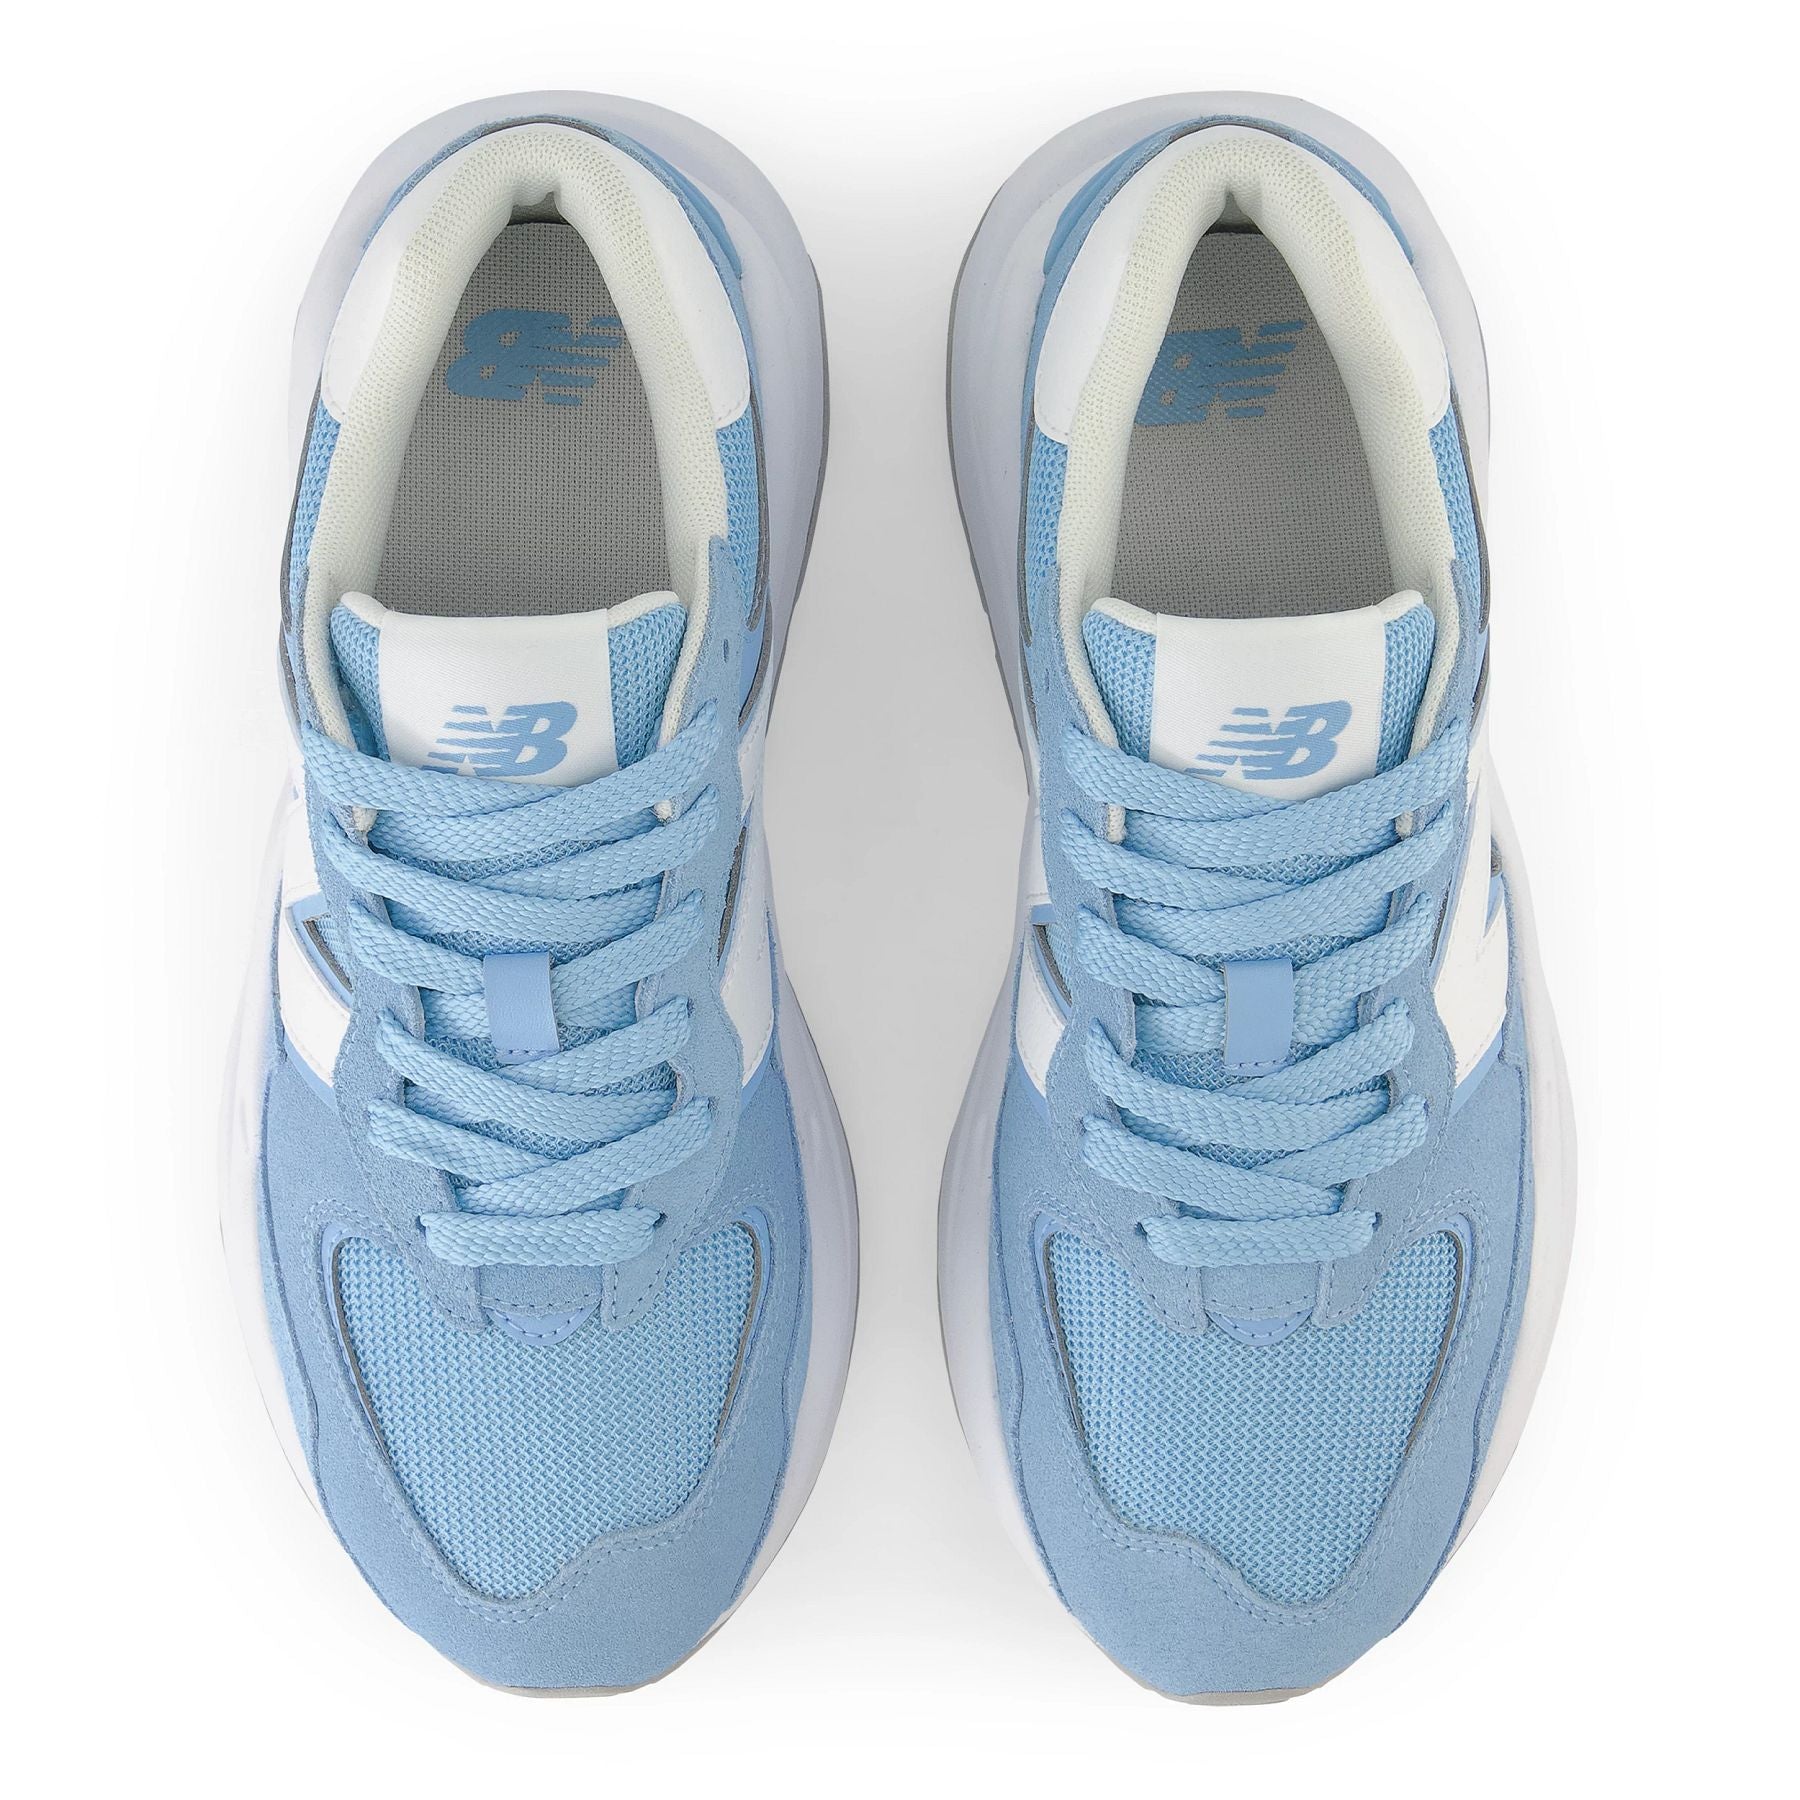 Top view of the Women's New Balance 5740 lifestyle shoe in the color Blue Haze